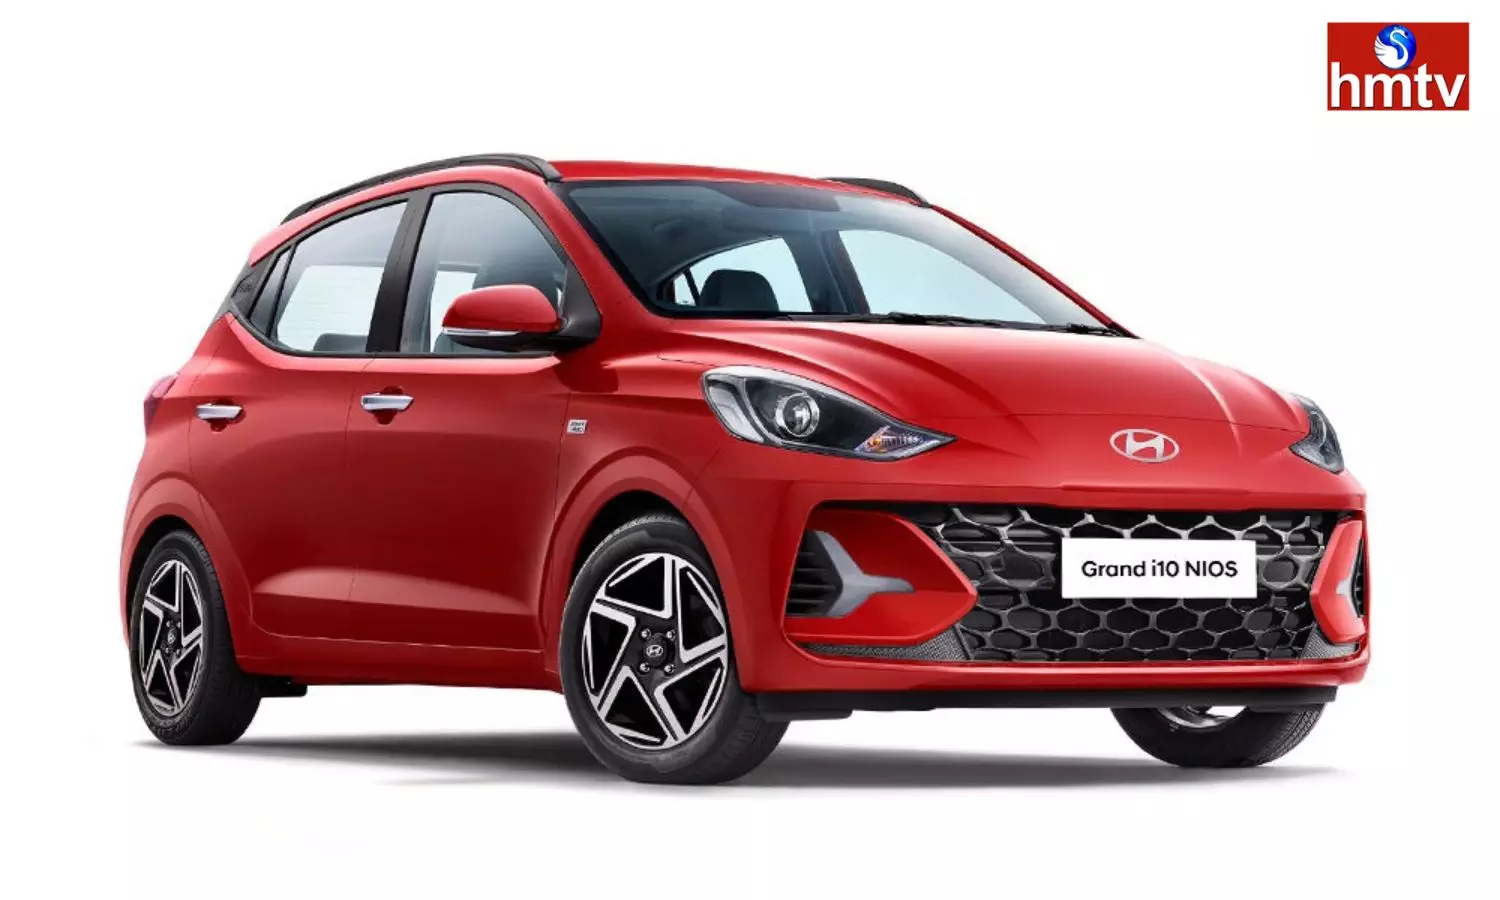 Hyundai Grand i10 nios corporate edition launched in India check price and features